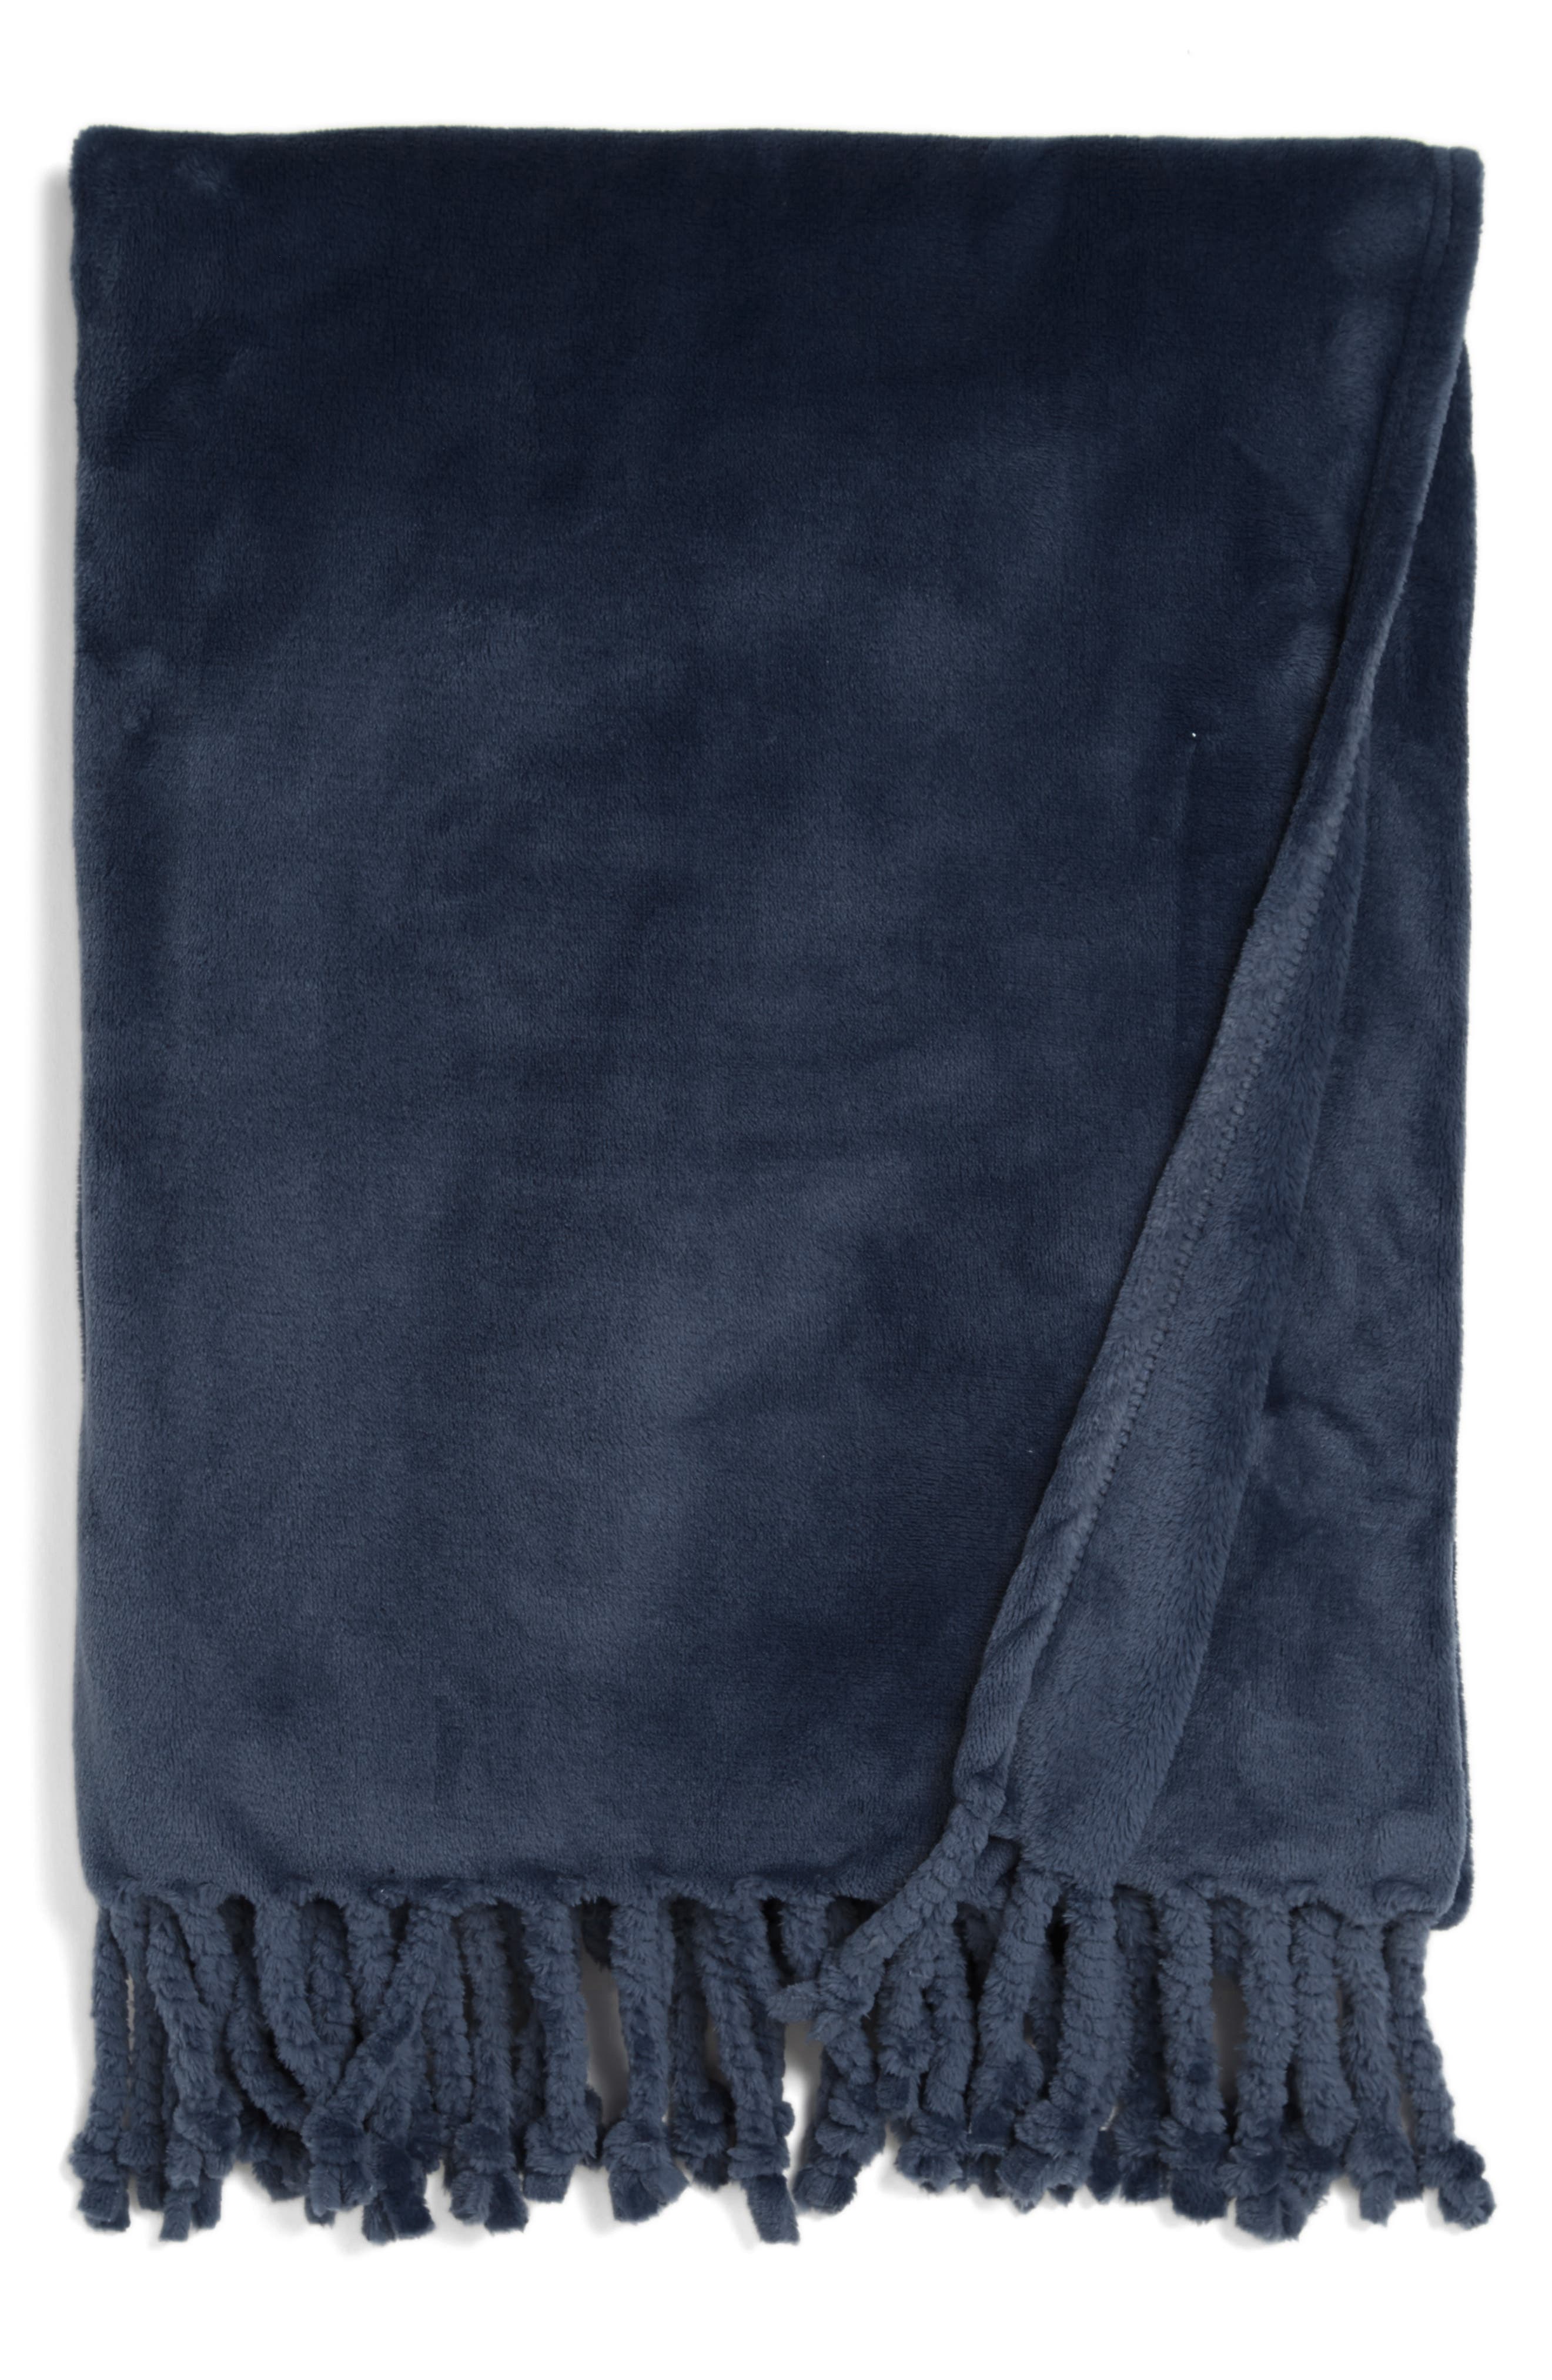 Nordstrom at Home Kennebunk Bliss Plush Throw 